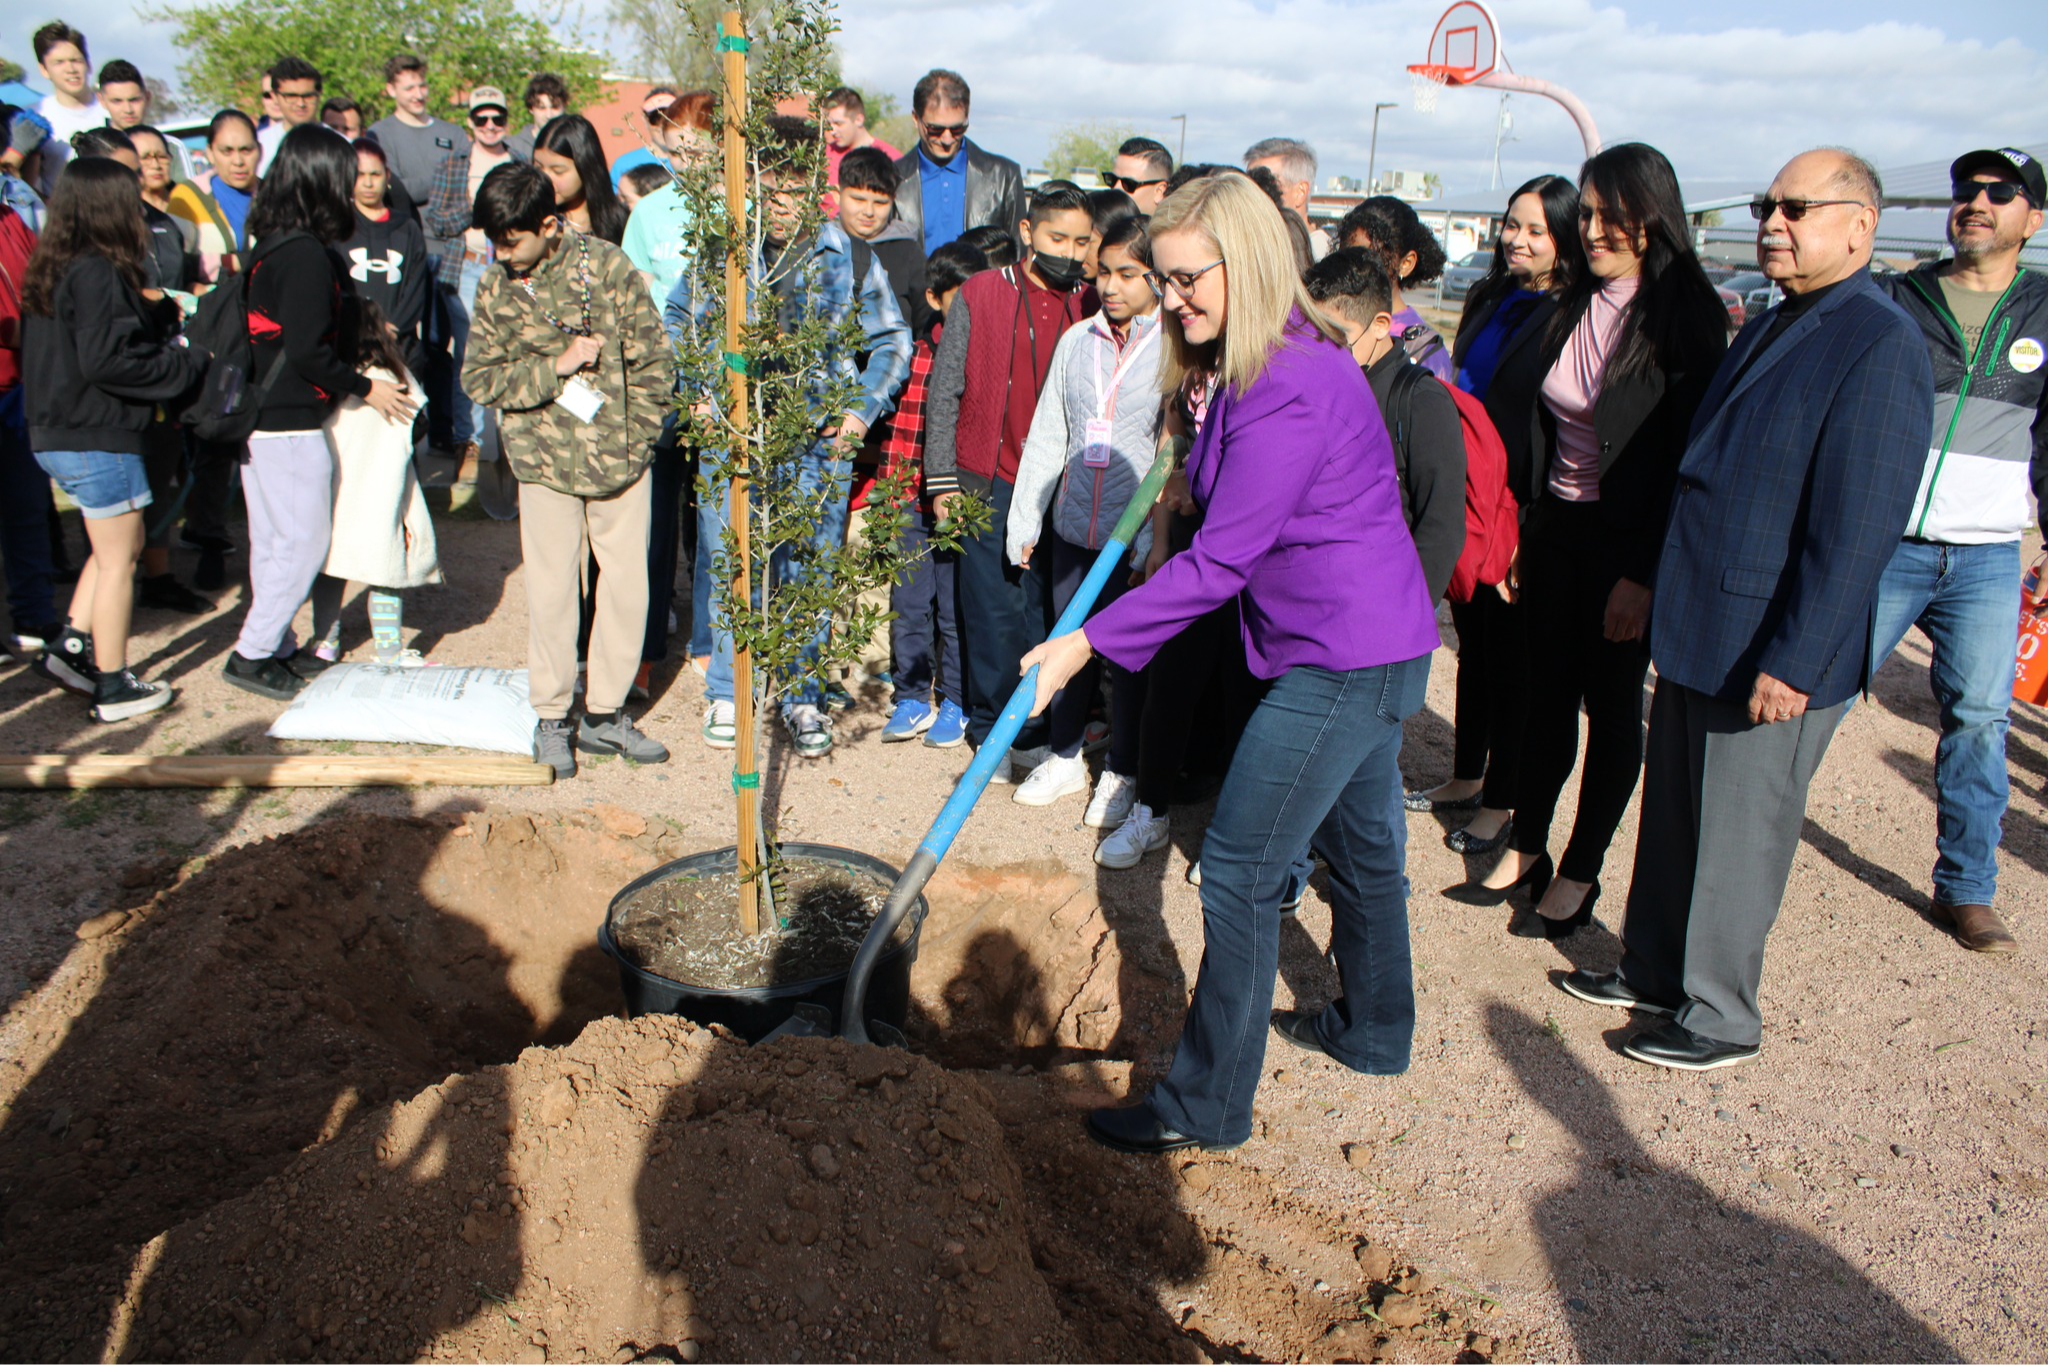 Mayor, Isaac leaders, staff and students come together to plant trees for better sustainability.